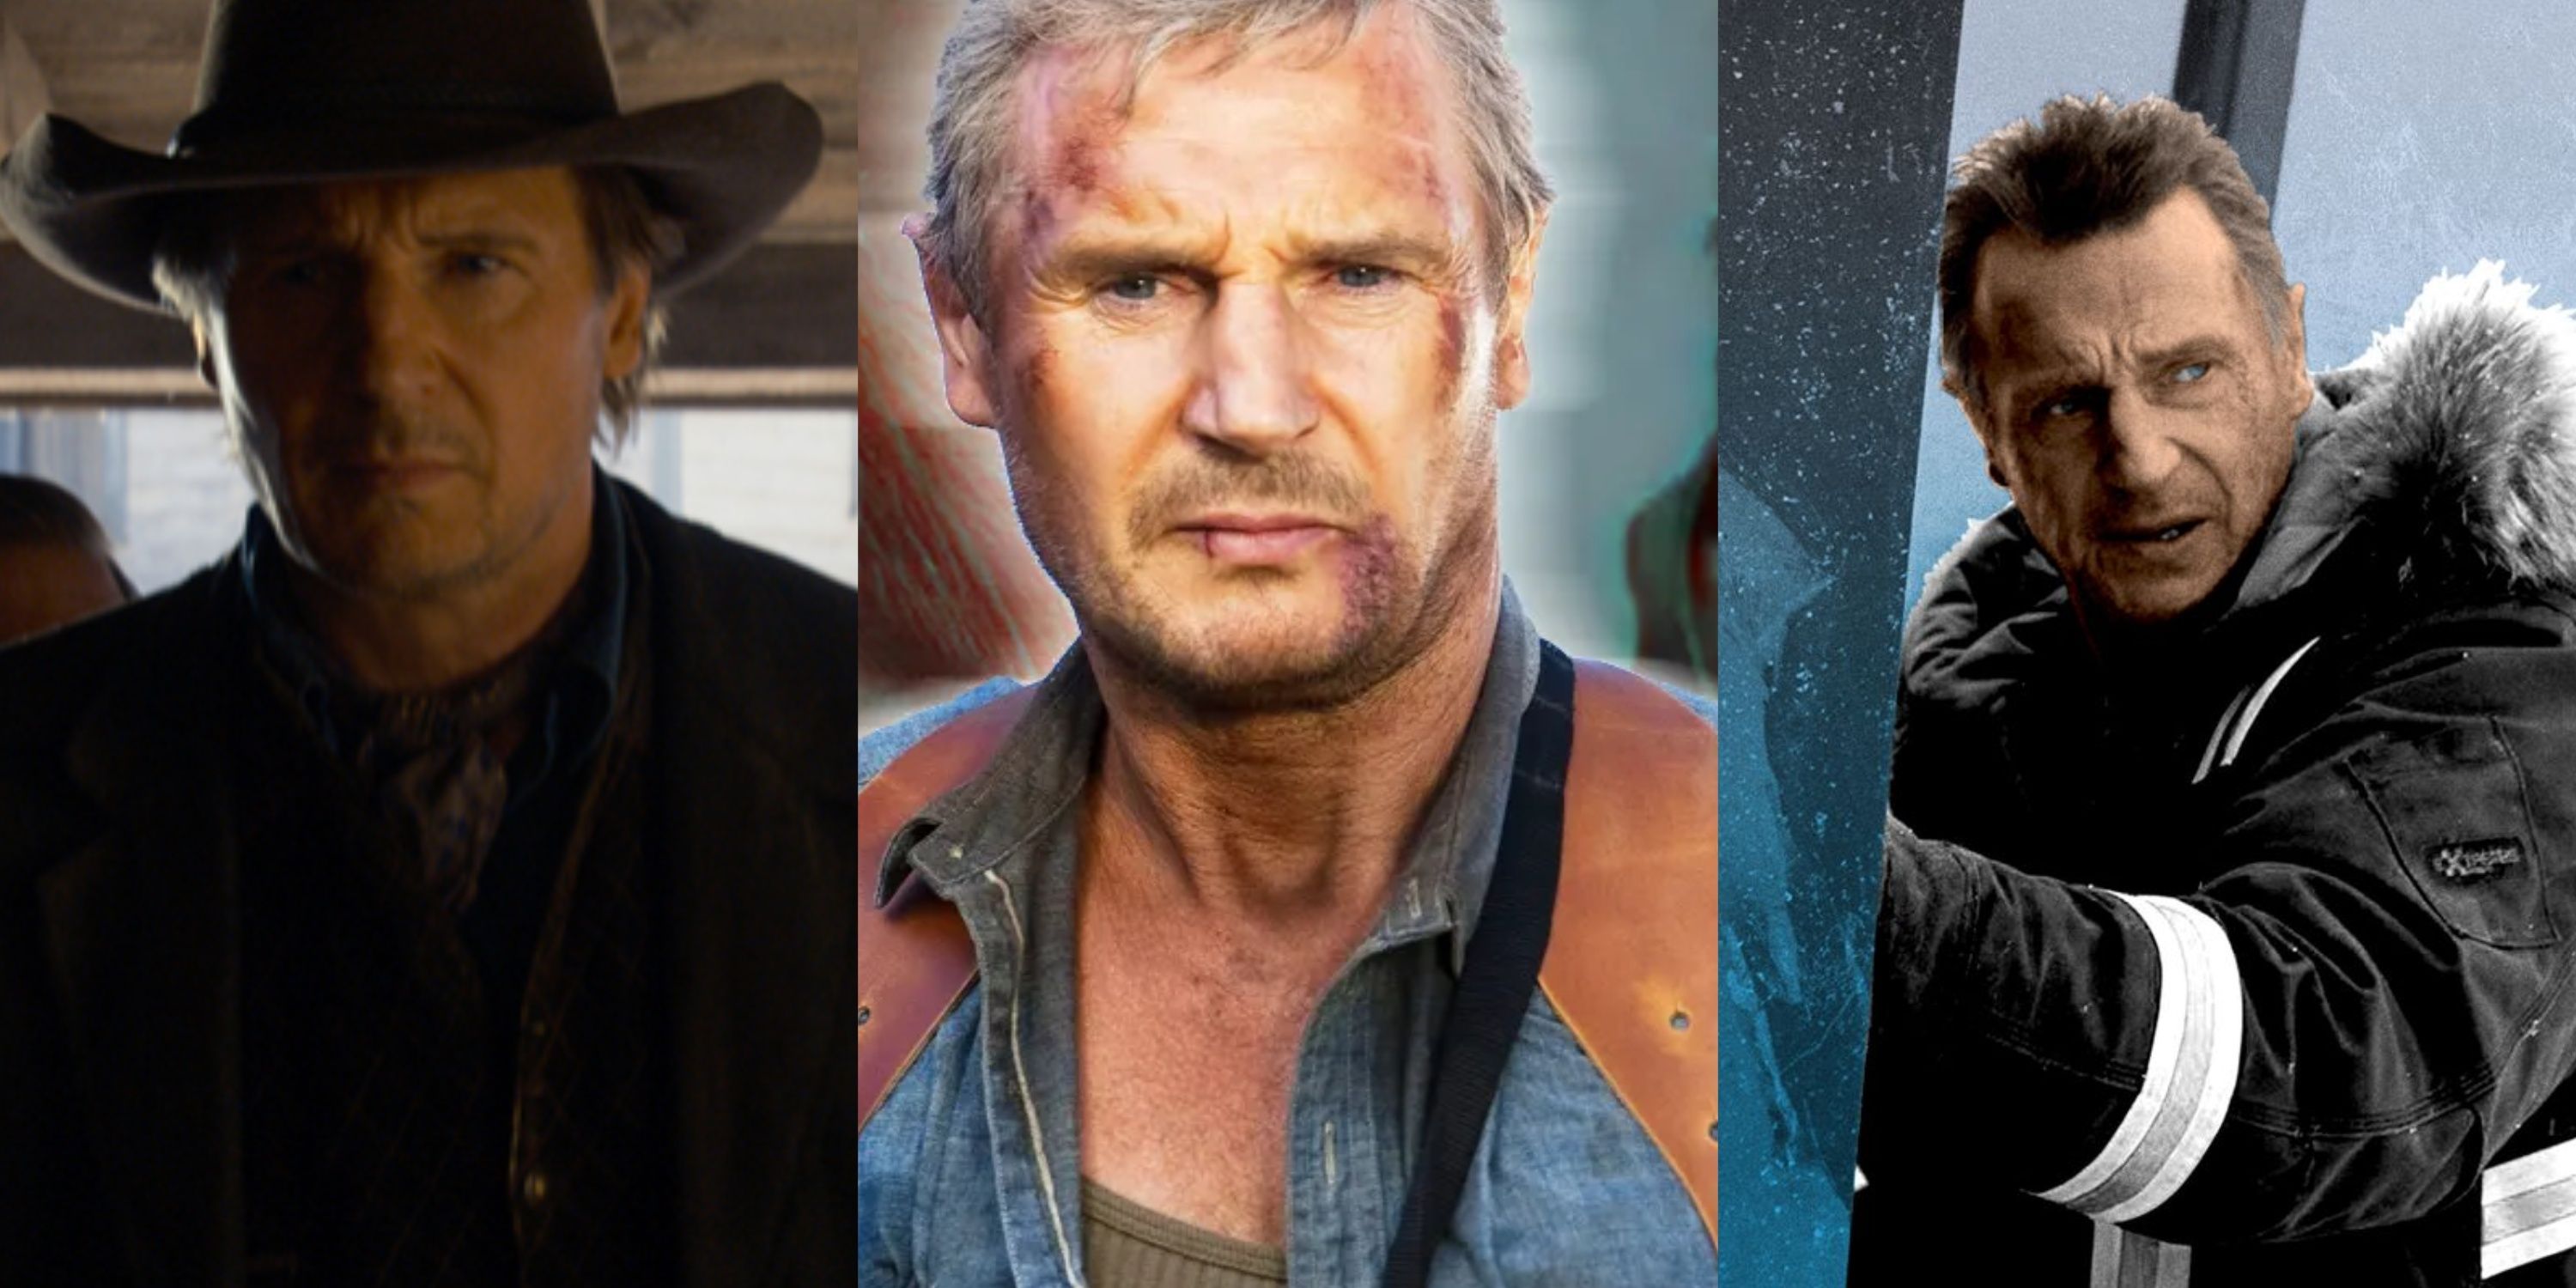 Split image Liam Neeson in A Million Ways To Die in the West, The A-Team and Cold Pursuit